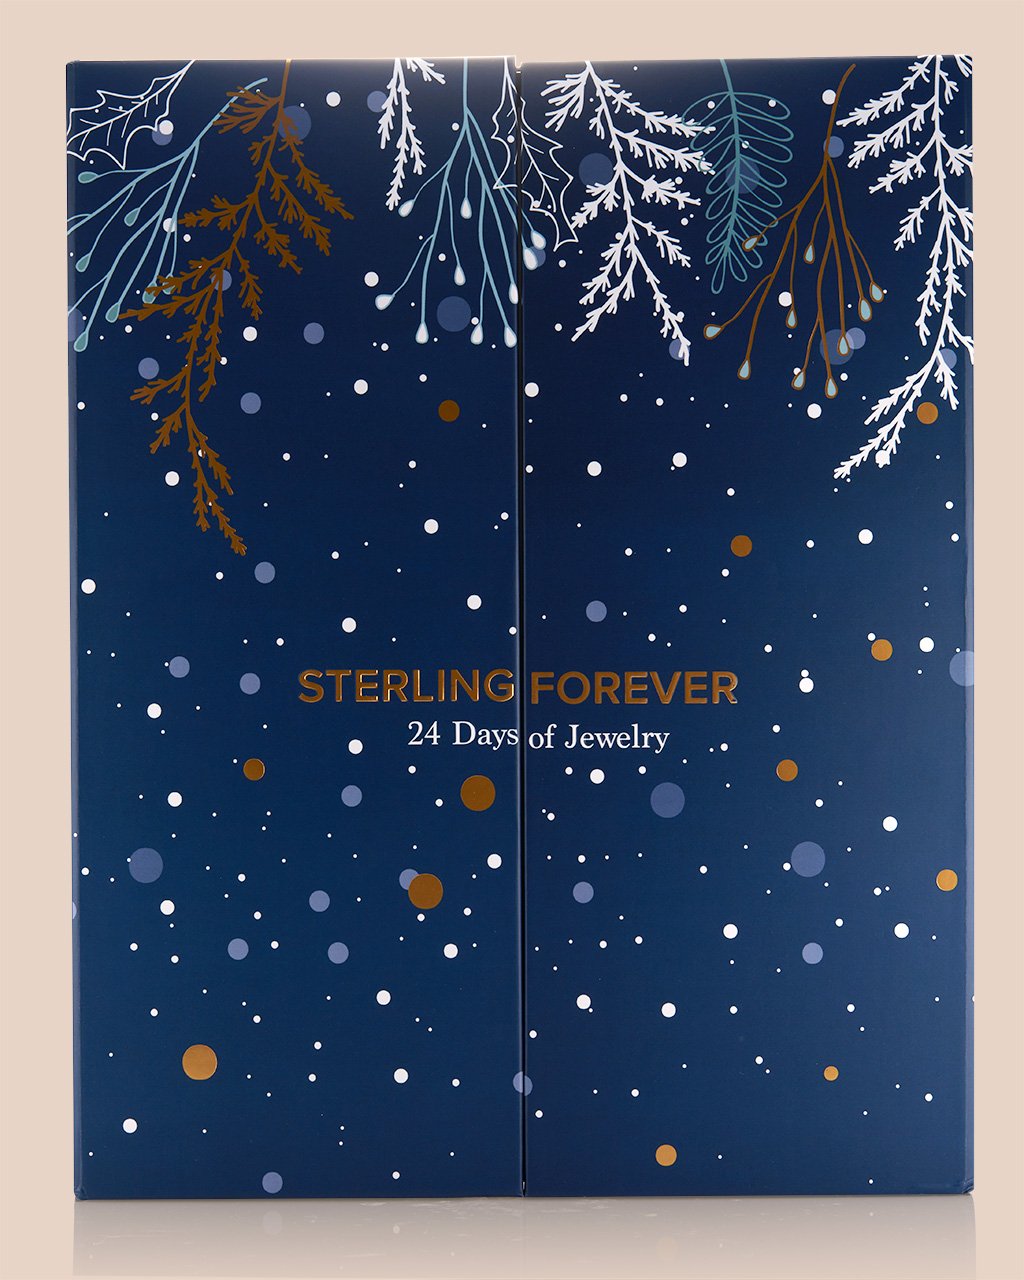 24 Days of Jewelry Advent Calendar Advent Calendars Sterling Forever 